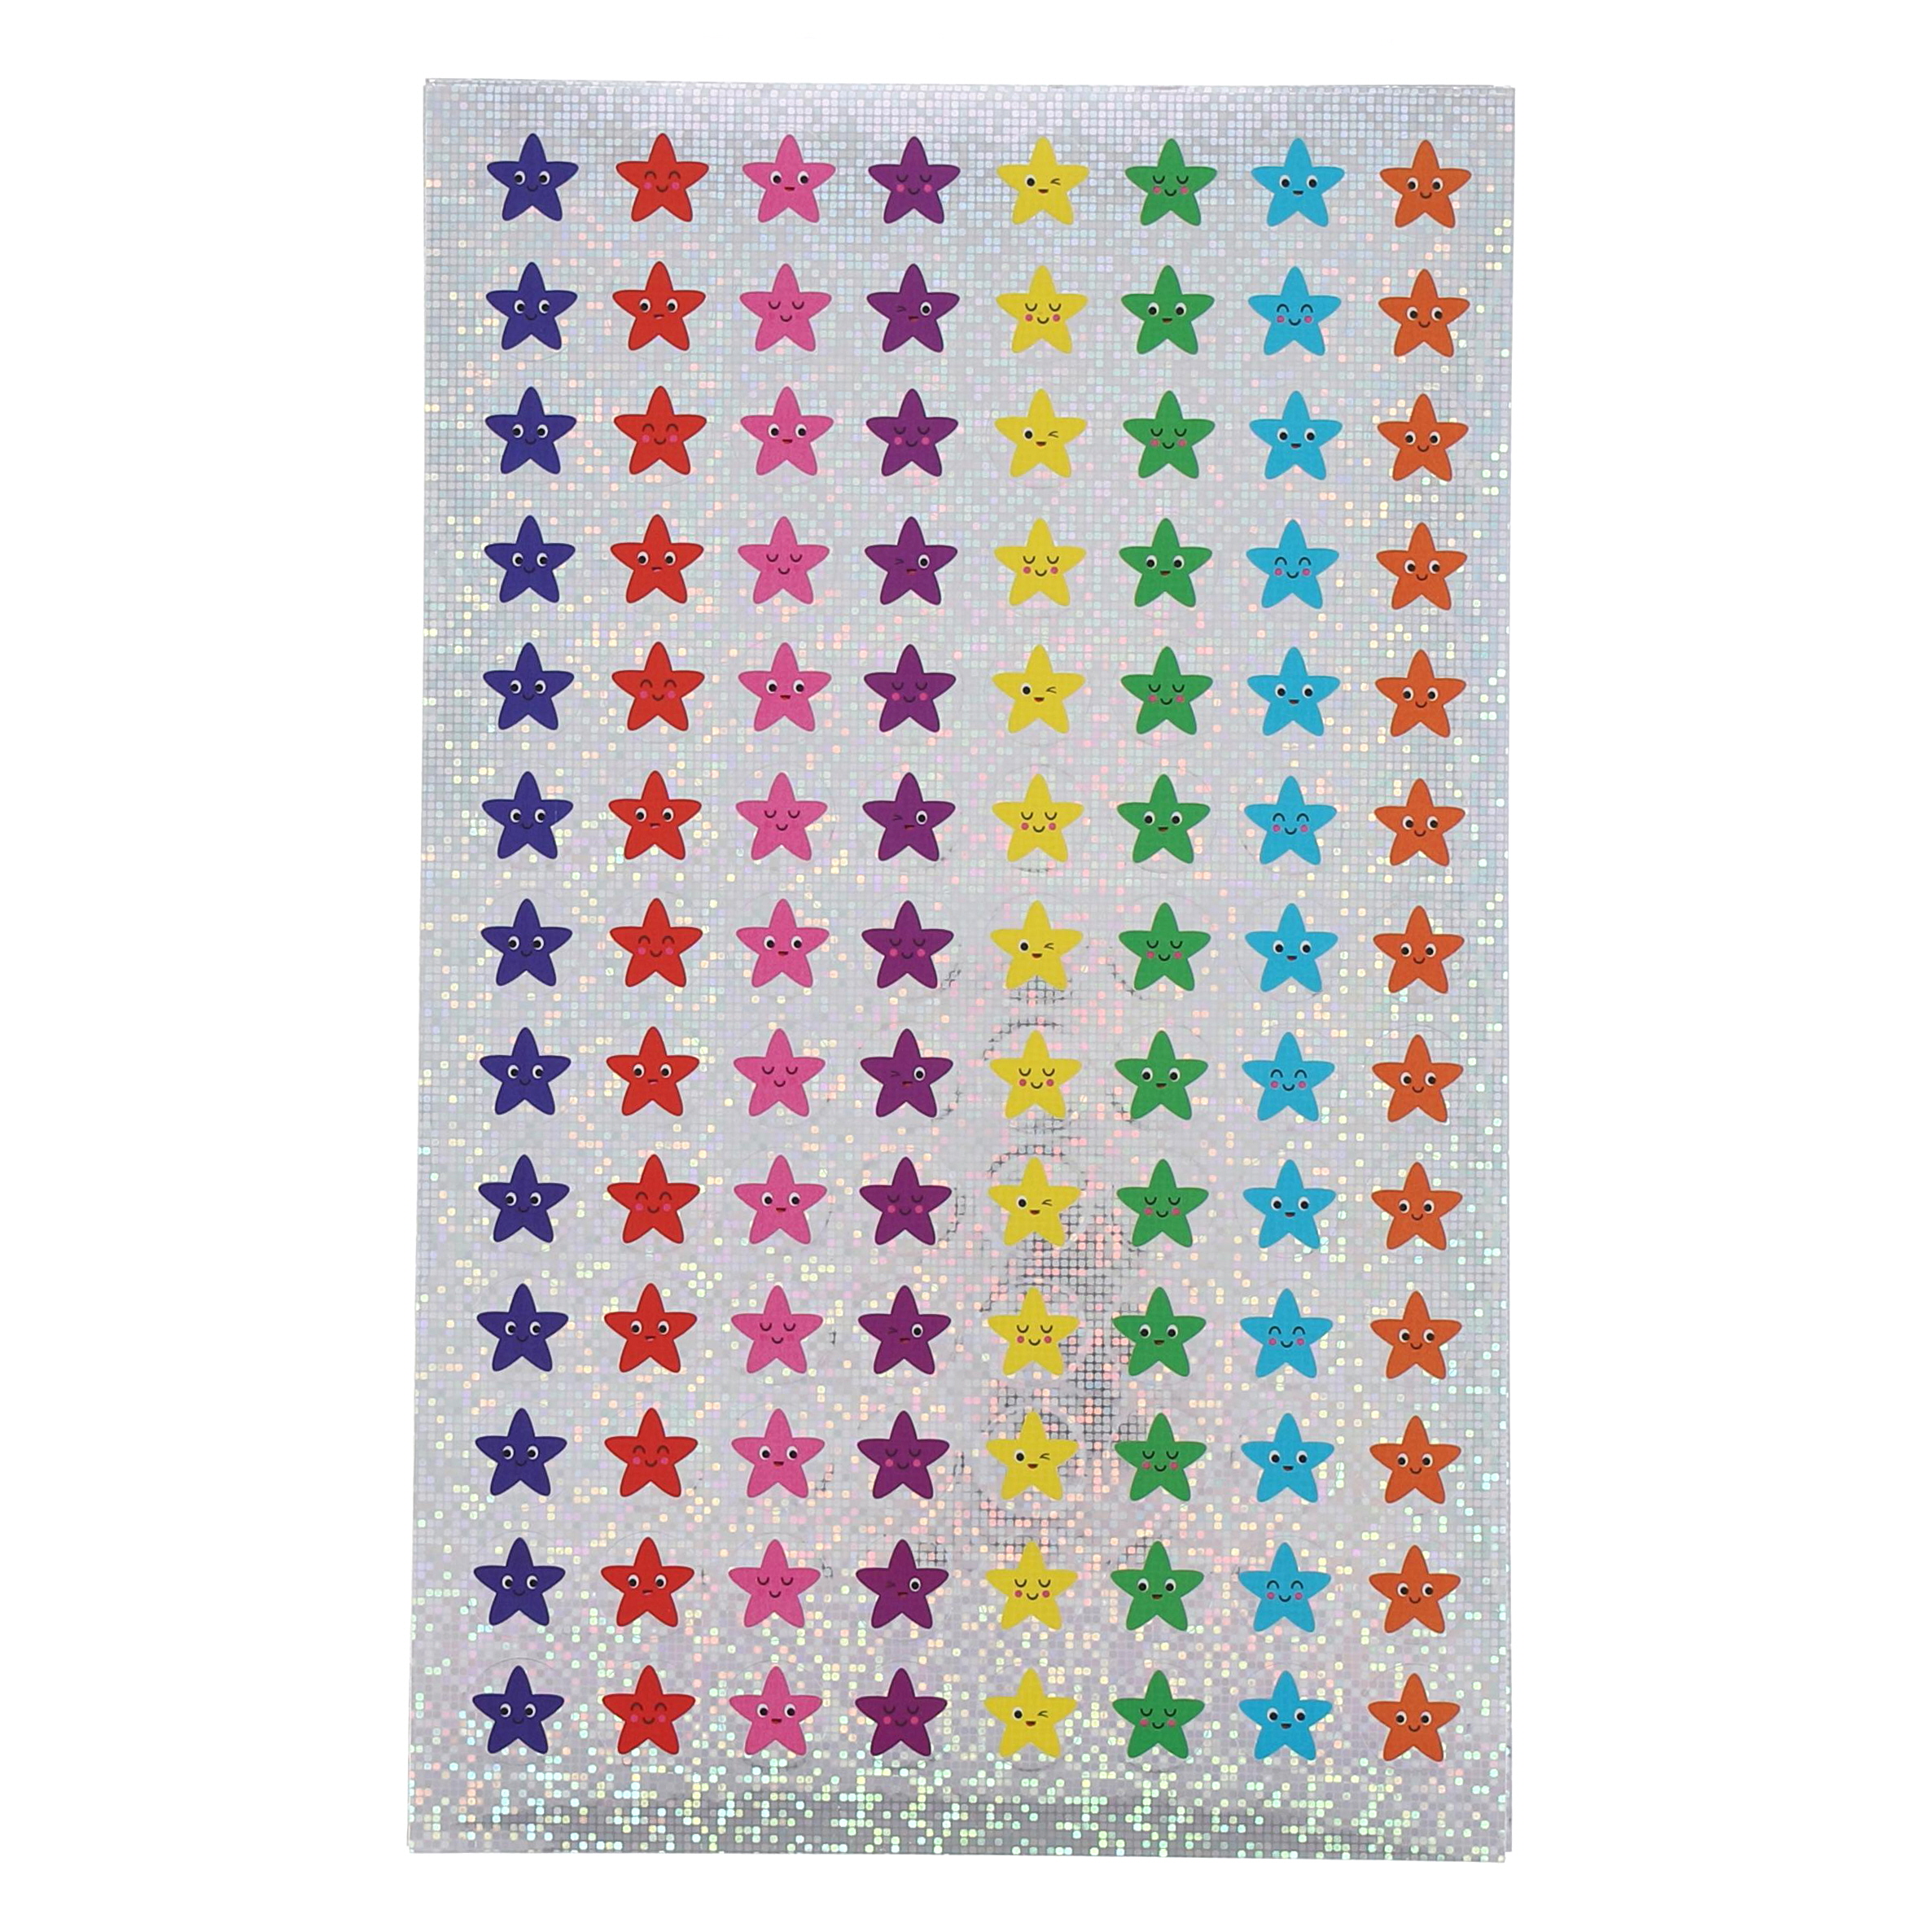 G1778915 - Classmates Sparkly Mini Star Stickers - 12mm - Pack of